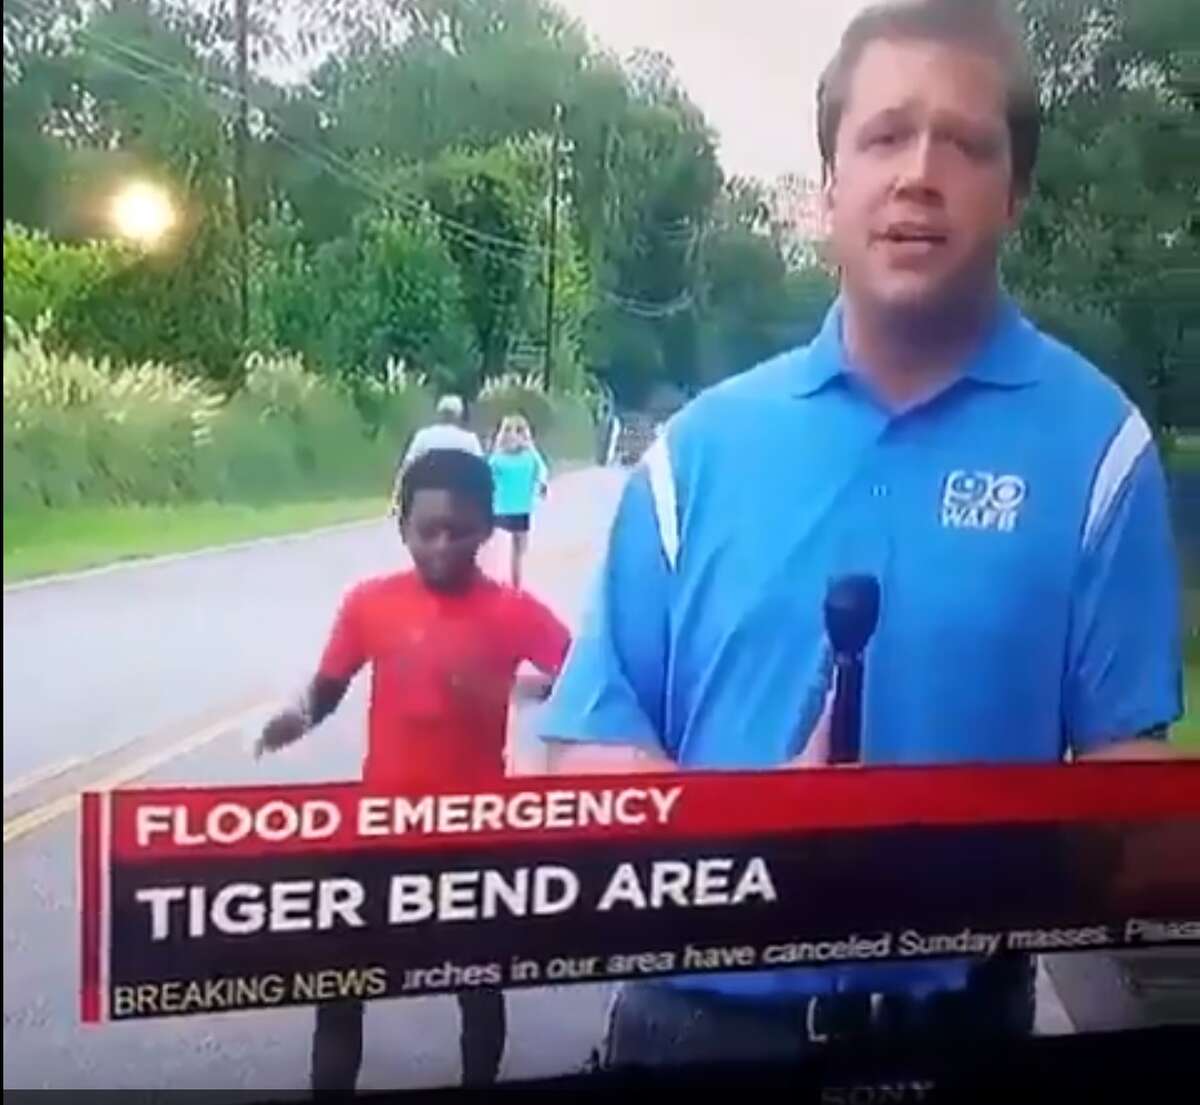 A young boy danced behind a news reporter from WAFB, a CBS-affiliate in Baton Rouge, during a broadcast Aug. 14, 2016.